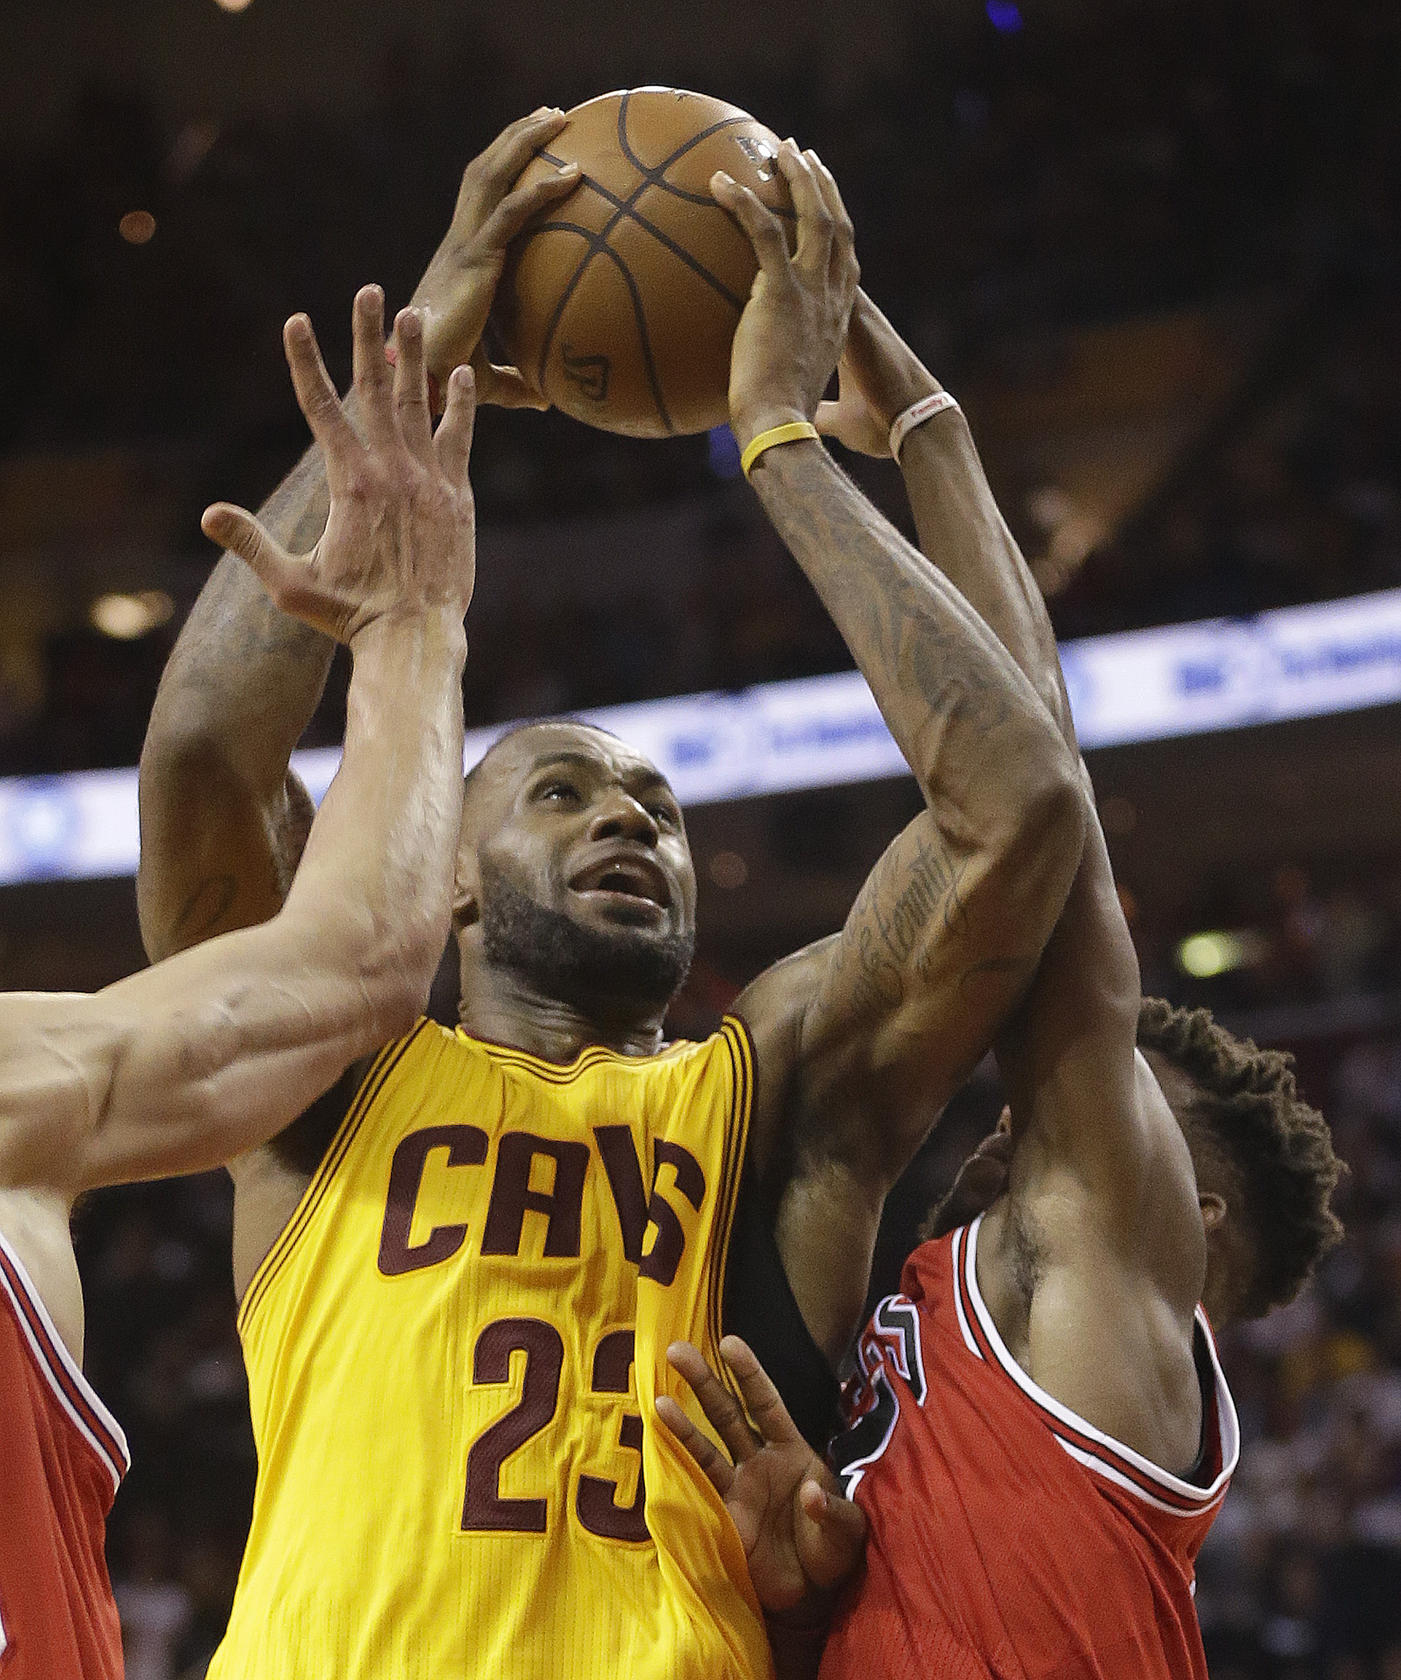 Cavaliers' LeBron James goes for a shot against the Bulls.Photo: AP